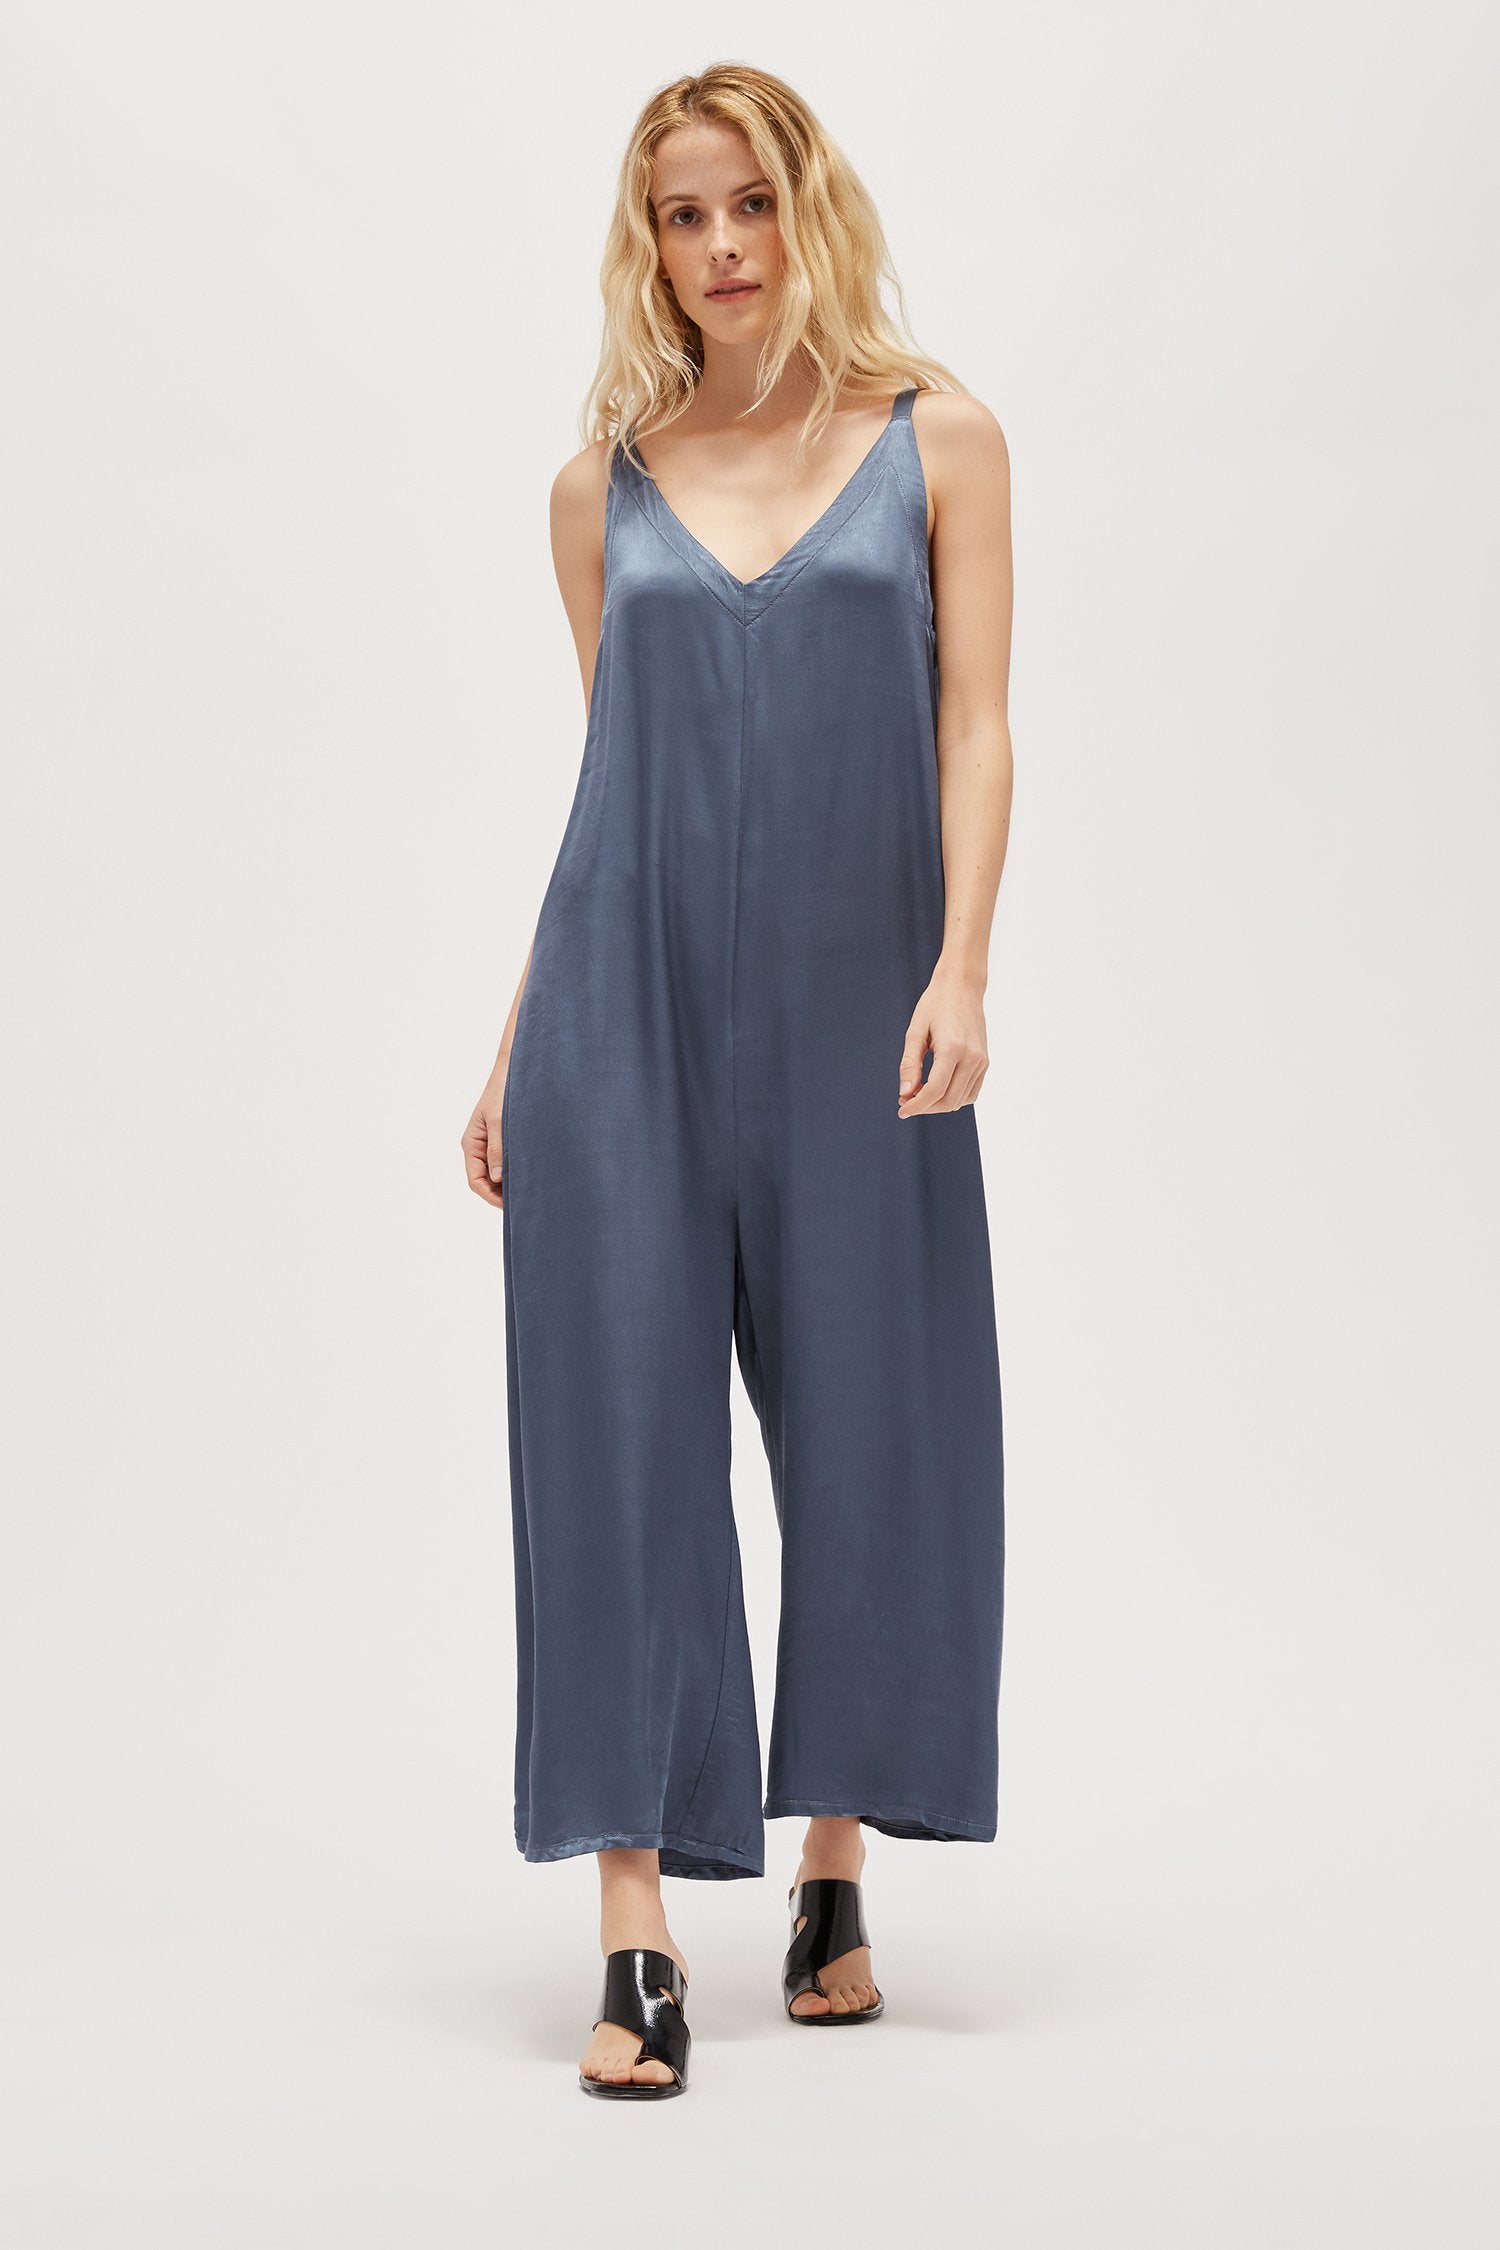 Lacausa Santi silky shiny Jumpsuit Black Tar | PIPE AND ROW Seattle